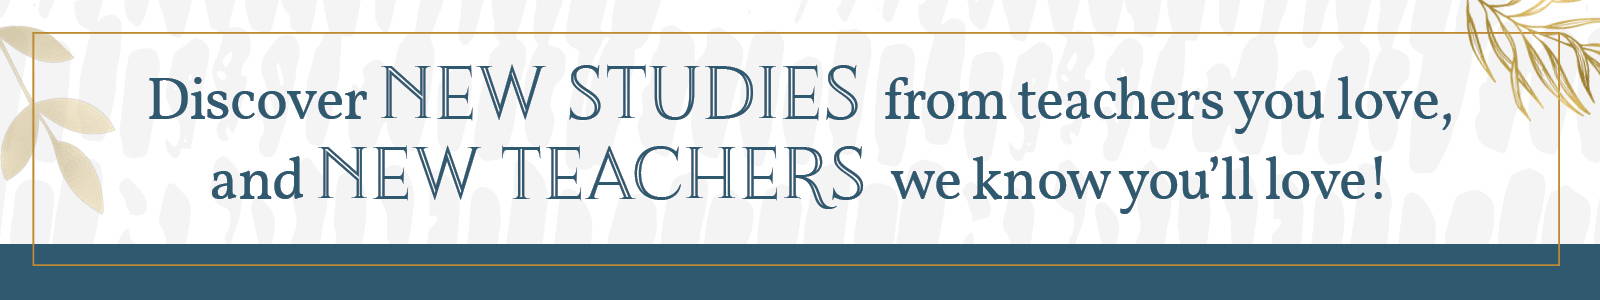 Discover new studies from teachers you love and new teachers we know you're love